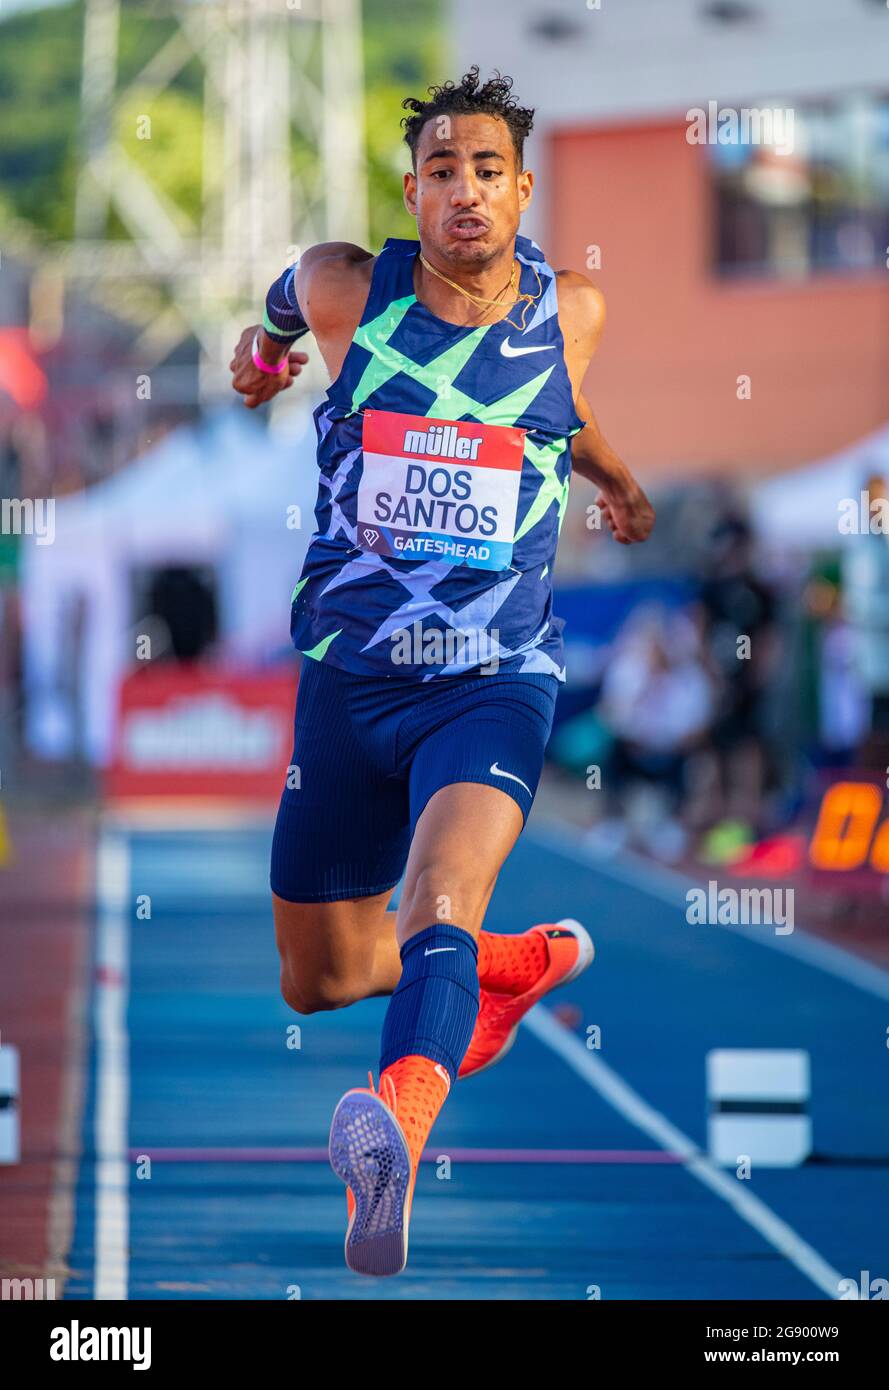 GATESHEAD, ENGLAND - JULY 13: Almir dos Santos (BRA) competing in the triple jump at the Muller British Grand Prix, part of the Wanda Diamond League a Stock Photo